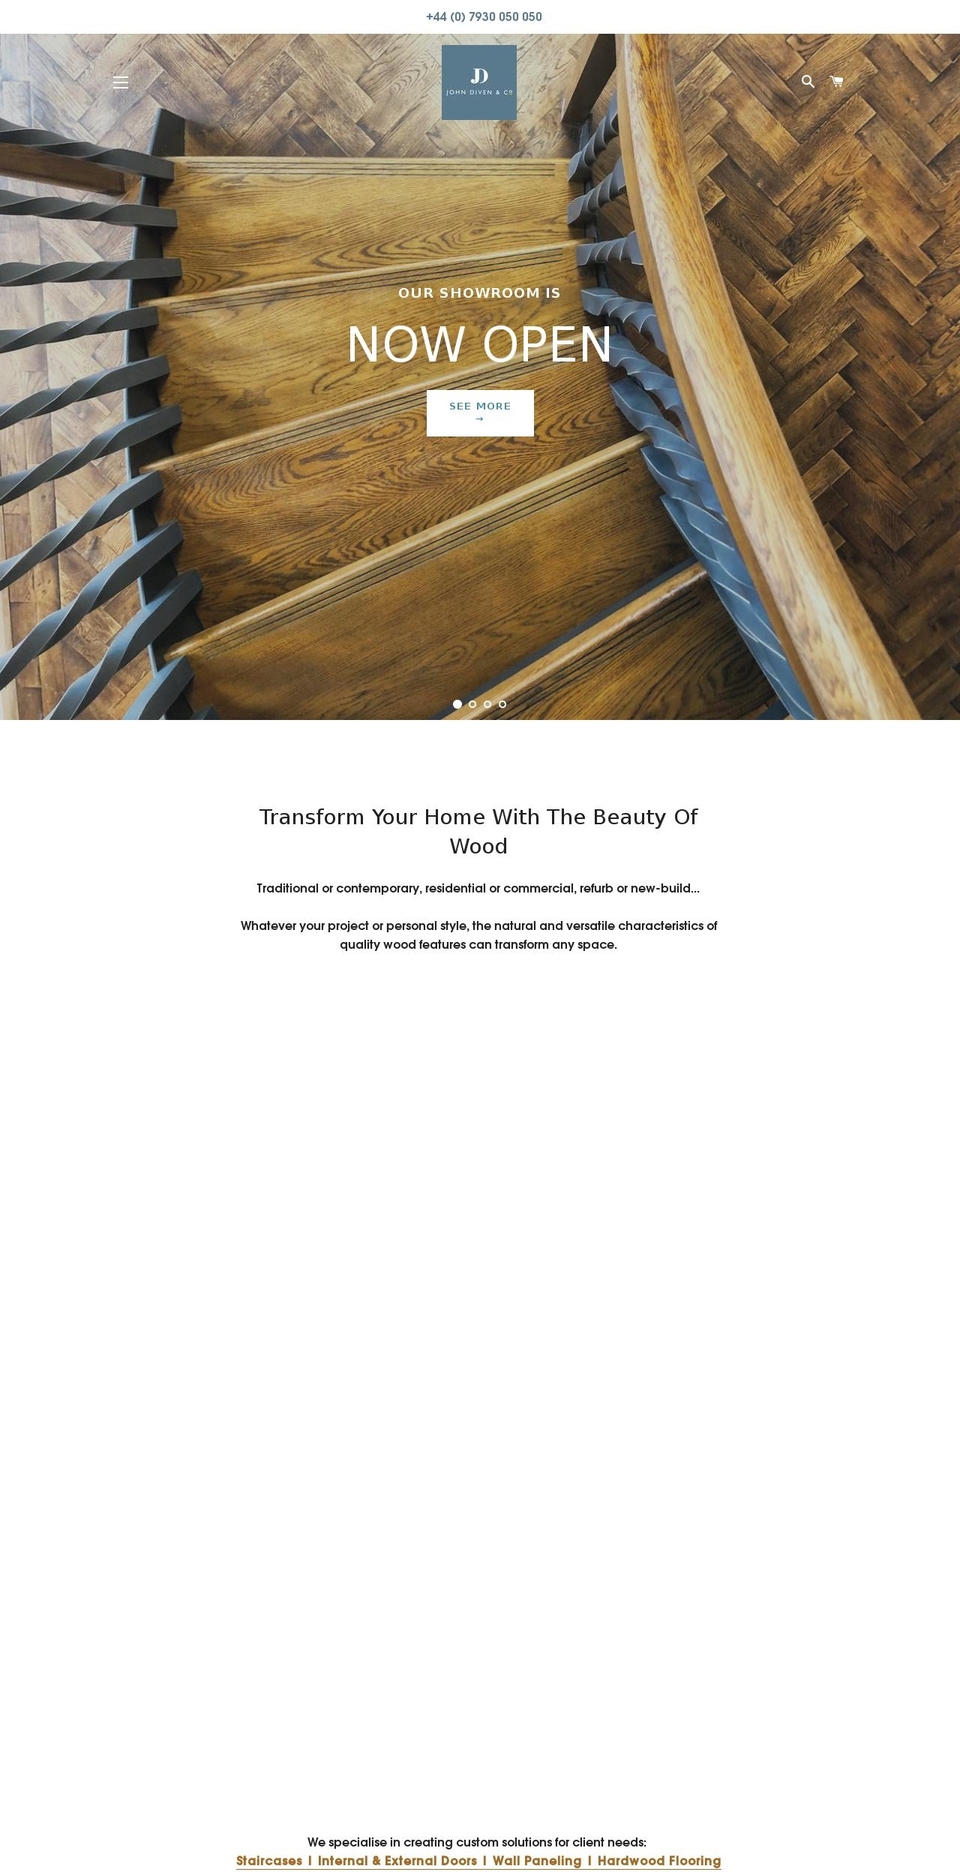 stairparts.company shopify website screenshot